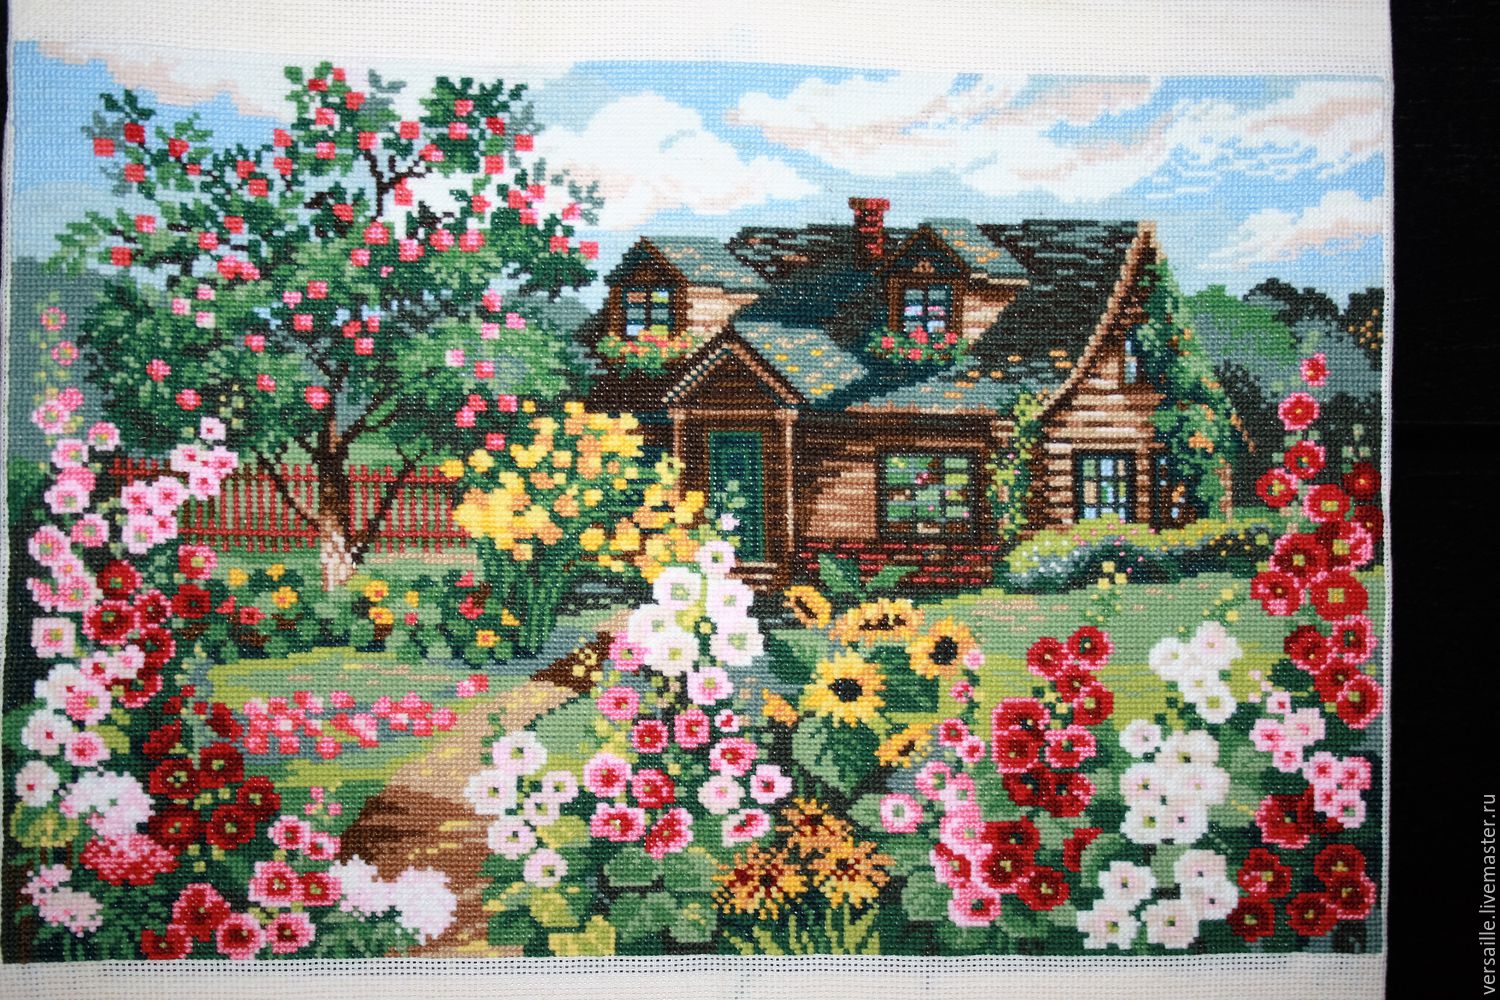 the picture village house in the village, embroidered pattern, the picture of the village, rustic style, rustic motifs, summer house, painting house